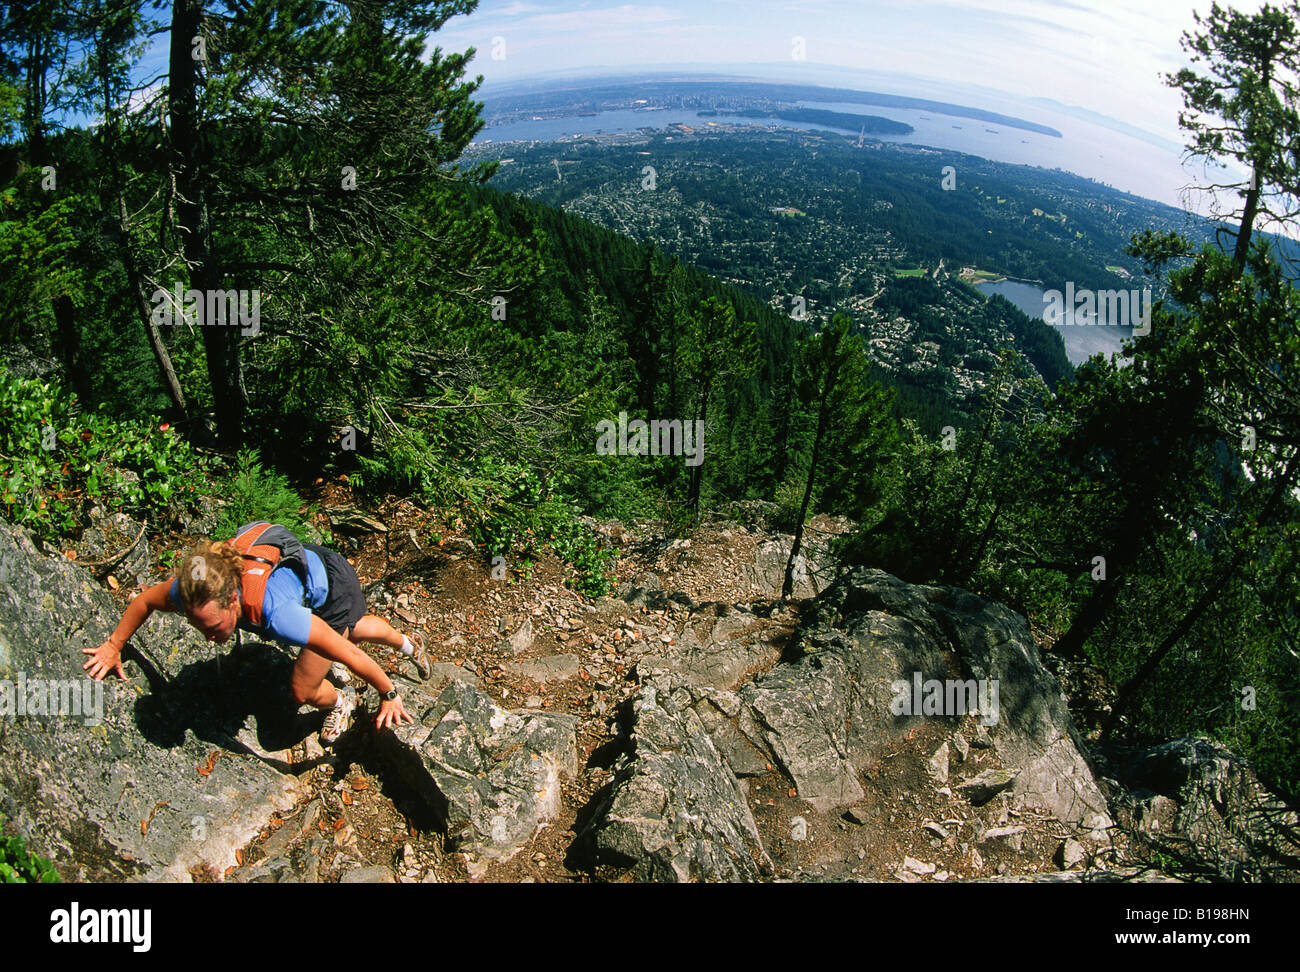 Women at the top of the Grouse Grind, Grouse Mountain, North Vancouver, British Columbia, Canada. Stock Photo